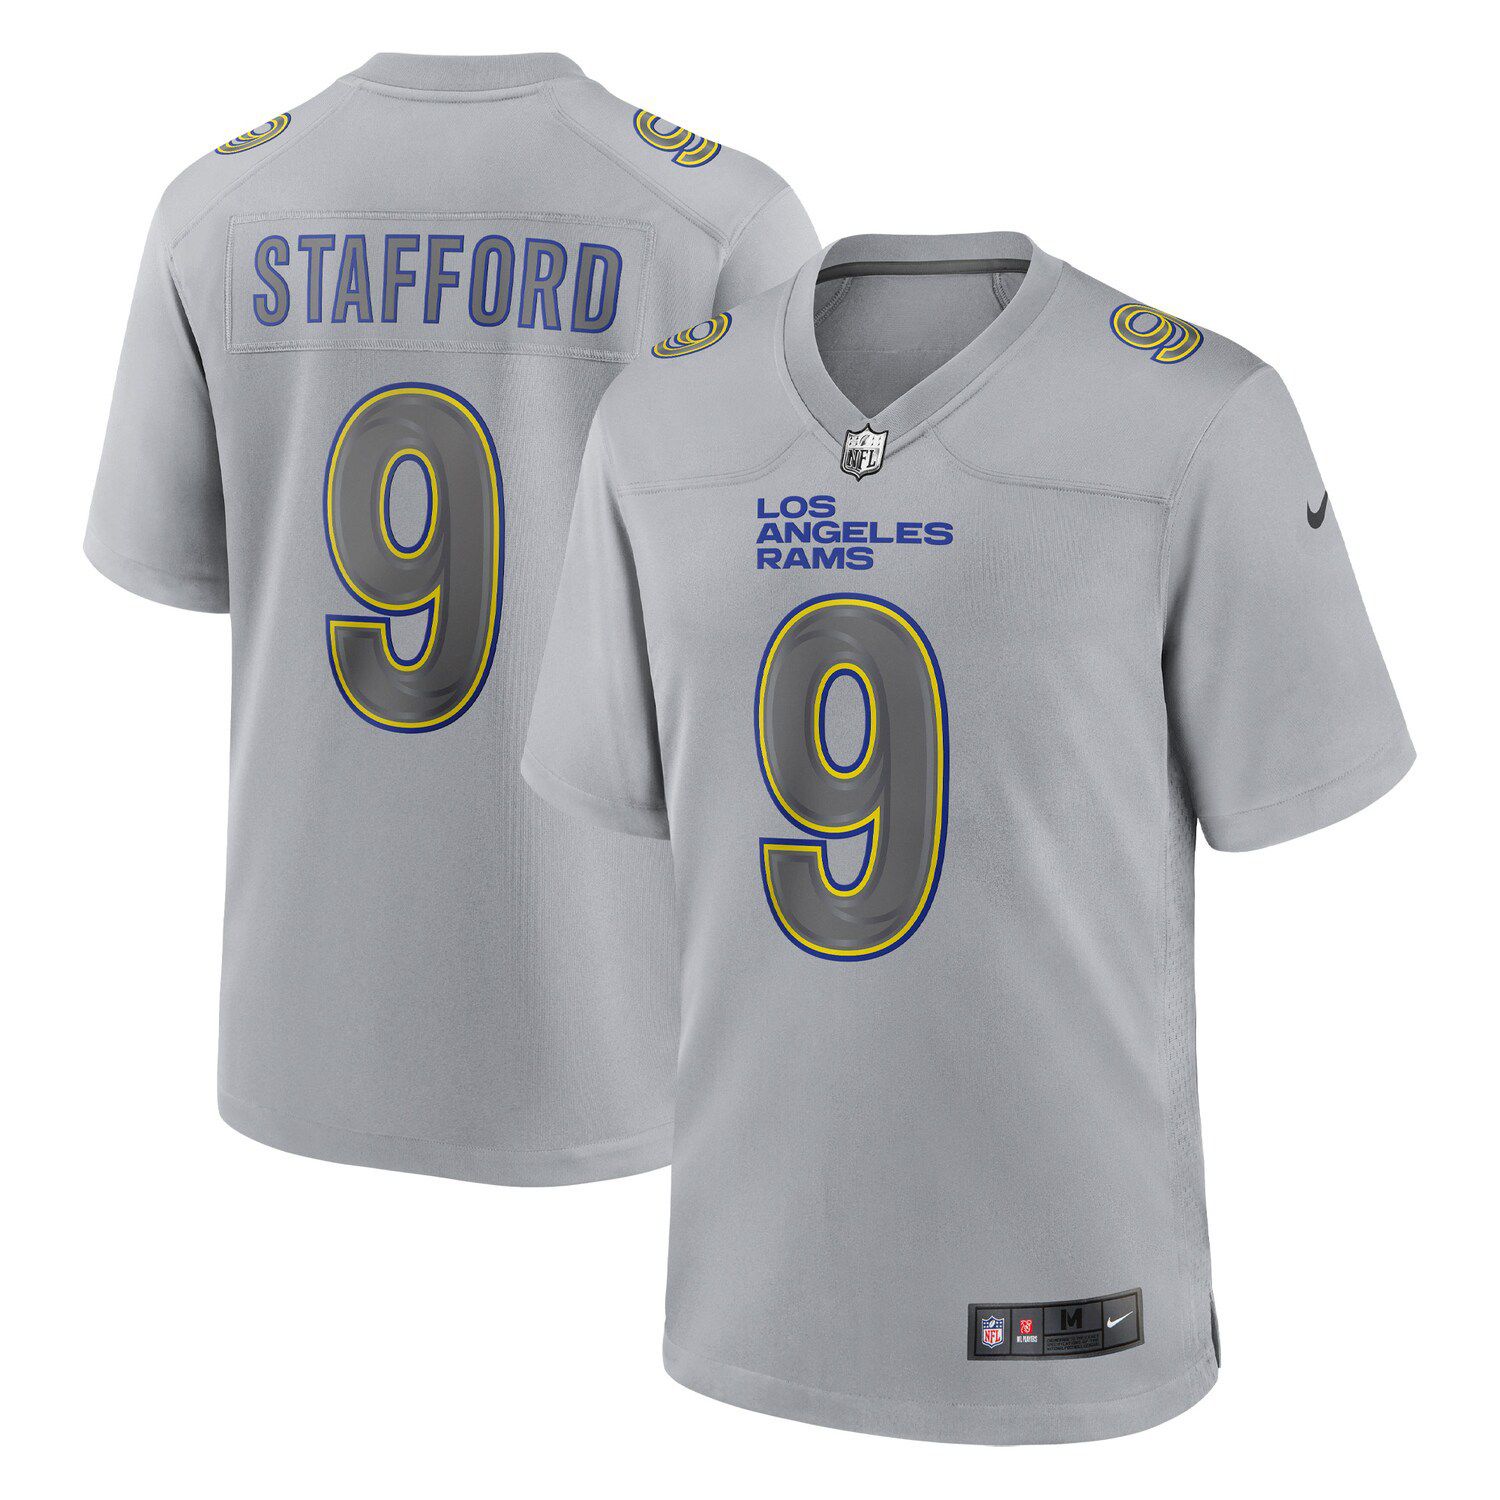 LA Rams Stafford Nike Bone Color Jersey Authentic Stitched Large